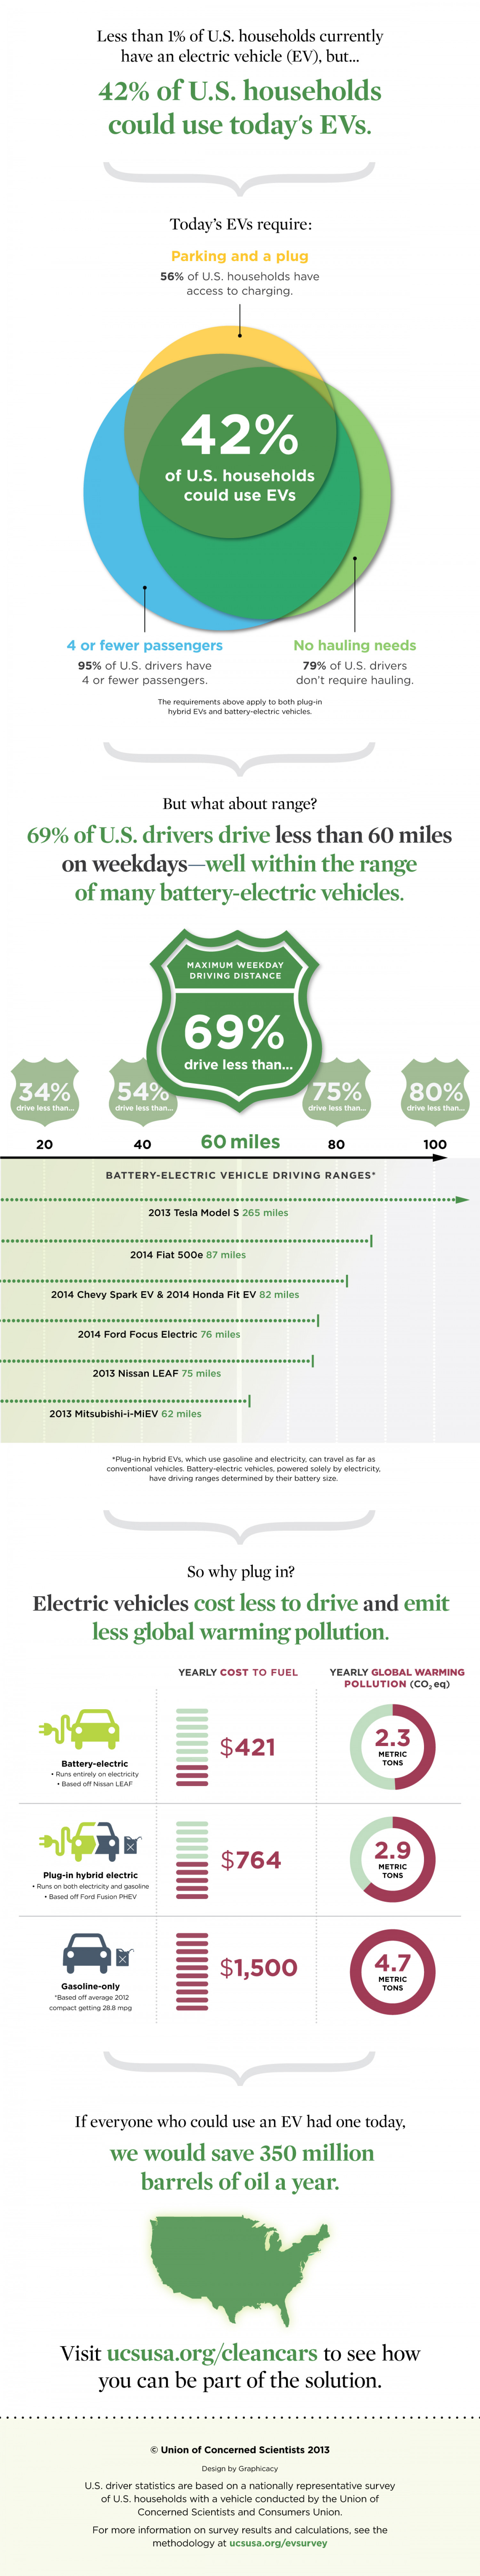 Facts About Electric Vehicles Infographic